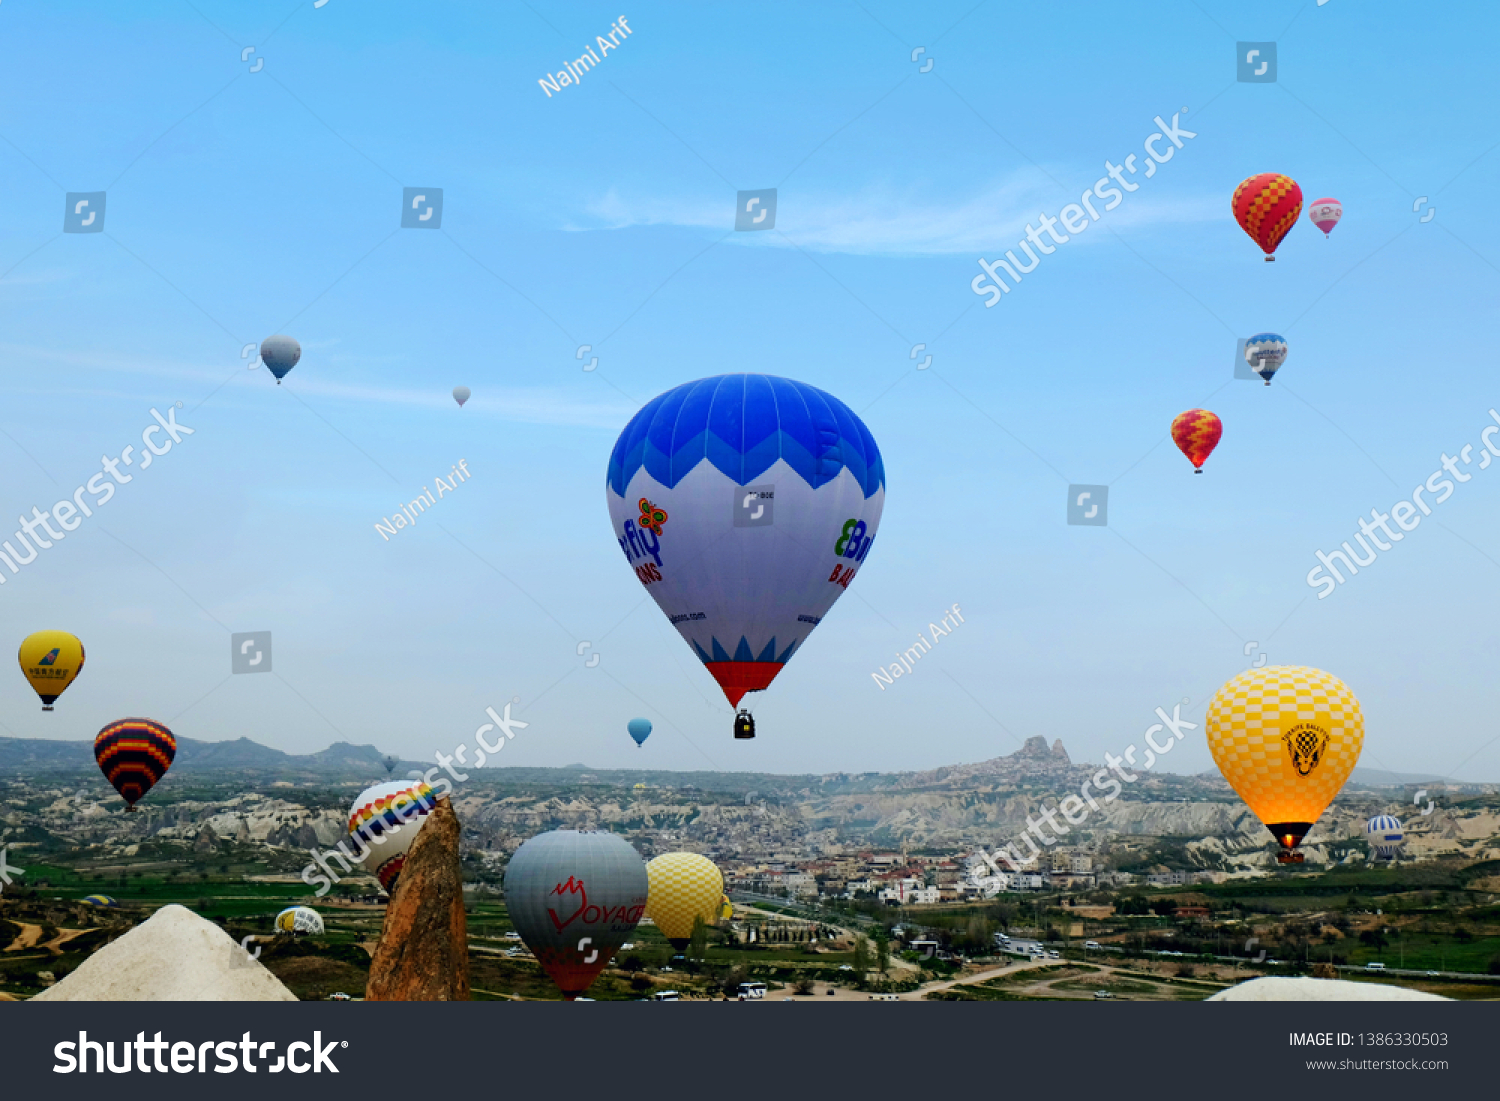 "Cappadocia, Turkey: Circa, April 2019: A morning picture of Cappadocia Hot Air Balloon during sunrise. Chinese have secure the deal for 1 million people each week for Cappadocia Hot Air Balloon." #1386330503